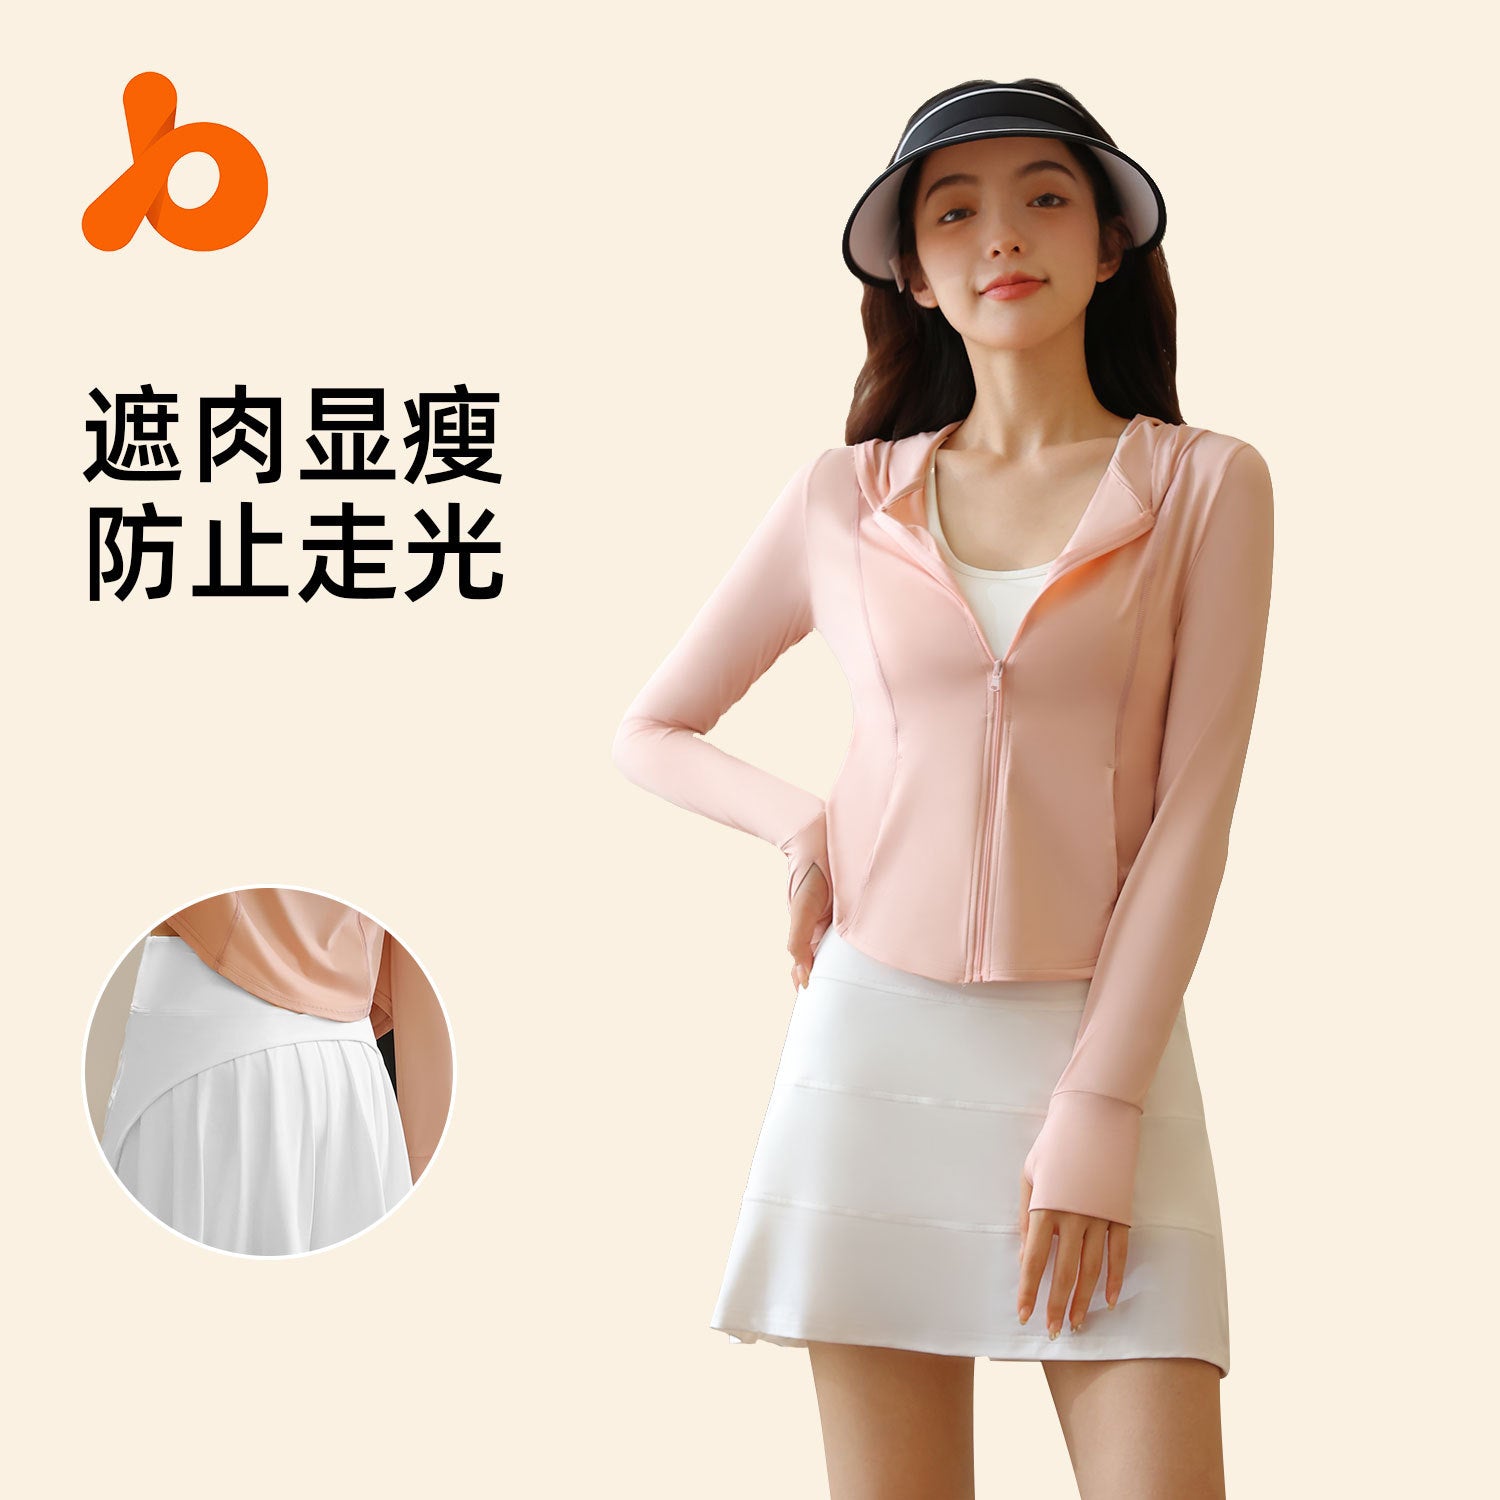 Gathering hall summer sun protection suit outdoor anti-ultraviolet elastic breathable skin clothing sun protection suit female